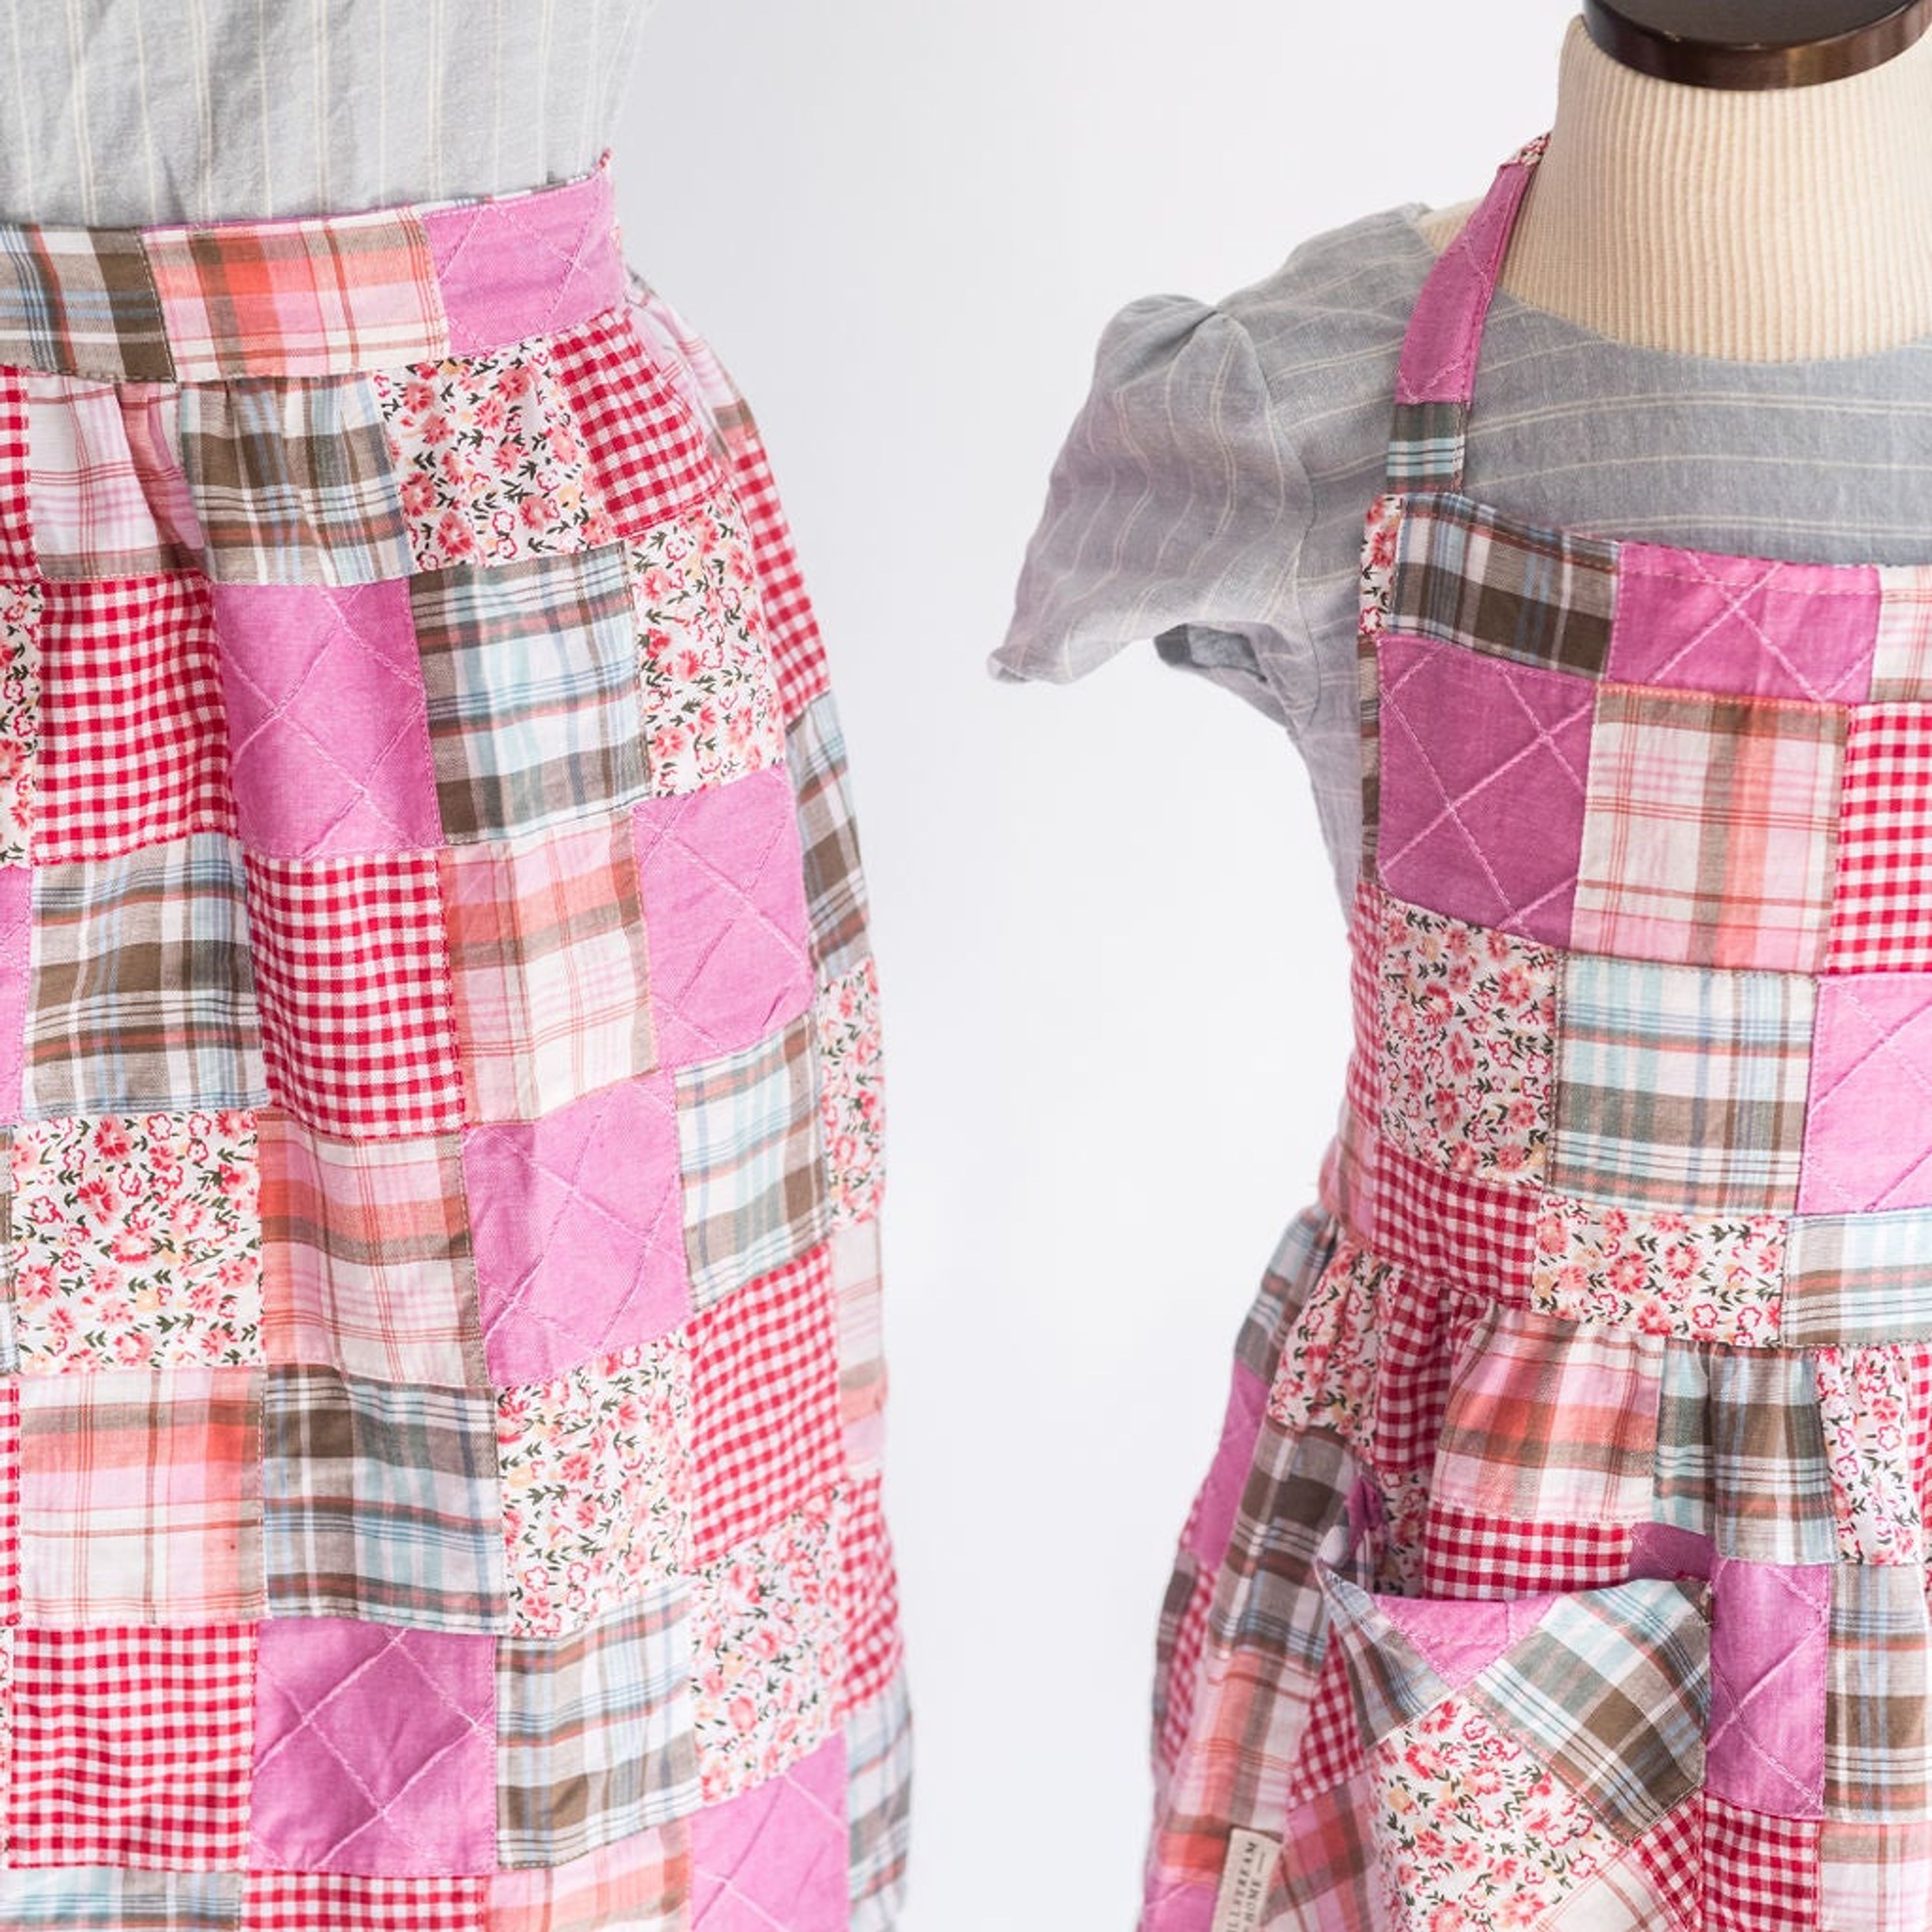 The Adult Quilted Patchwork Apron